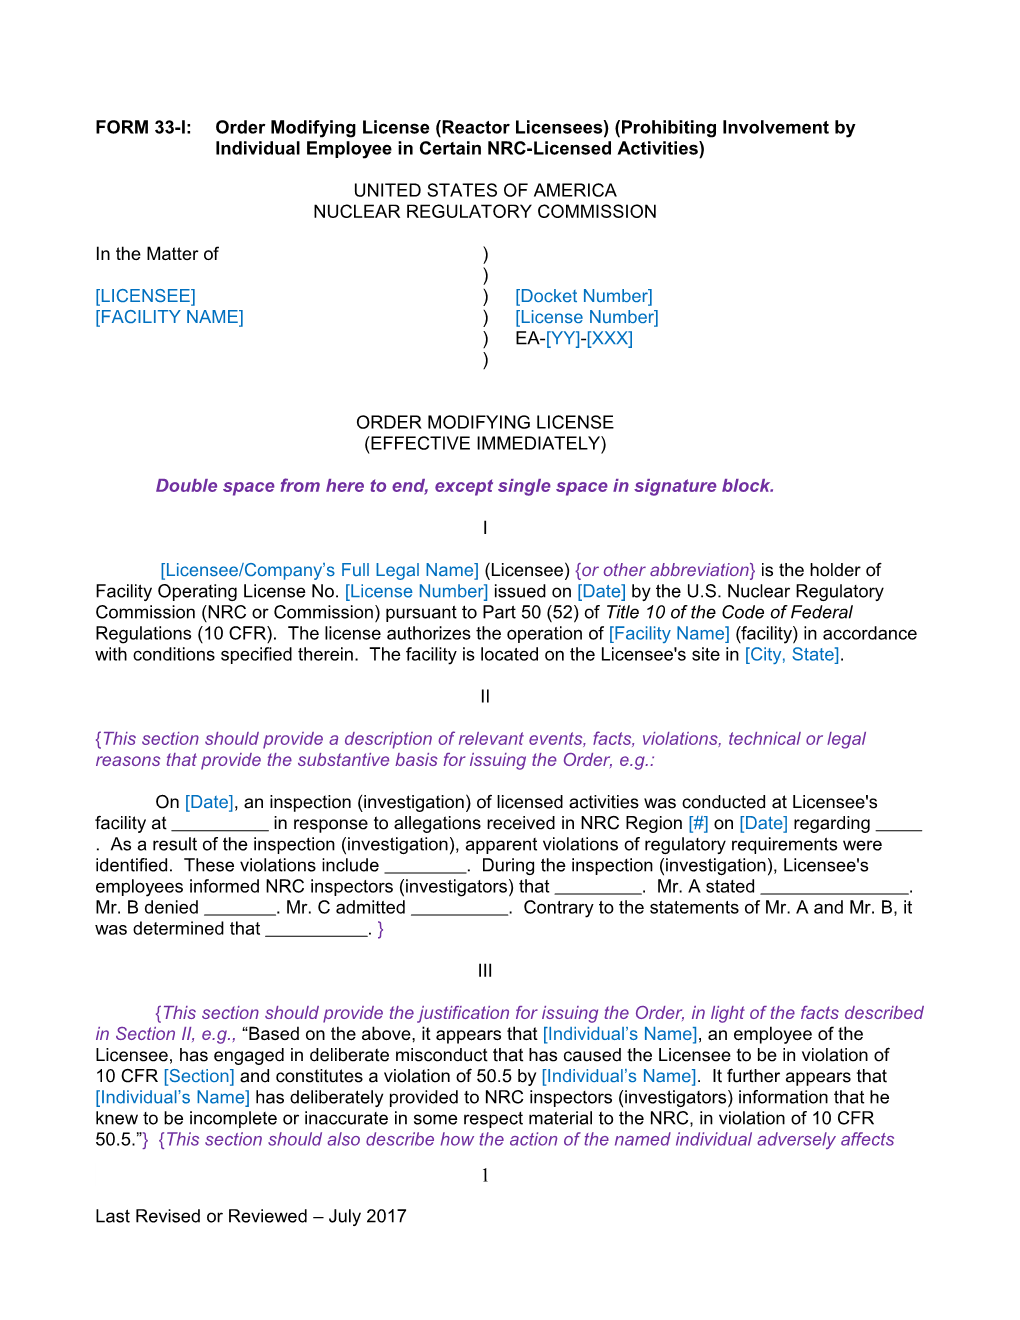 Form 33-I: Order Modifying License (Reactor Licensee) (Prohibiting Involvement by Individual